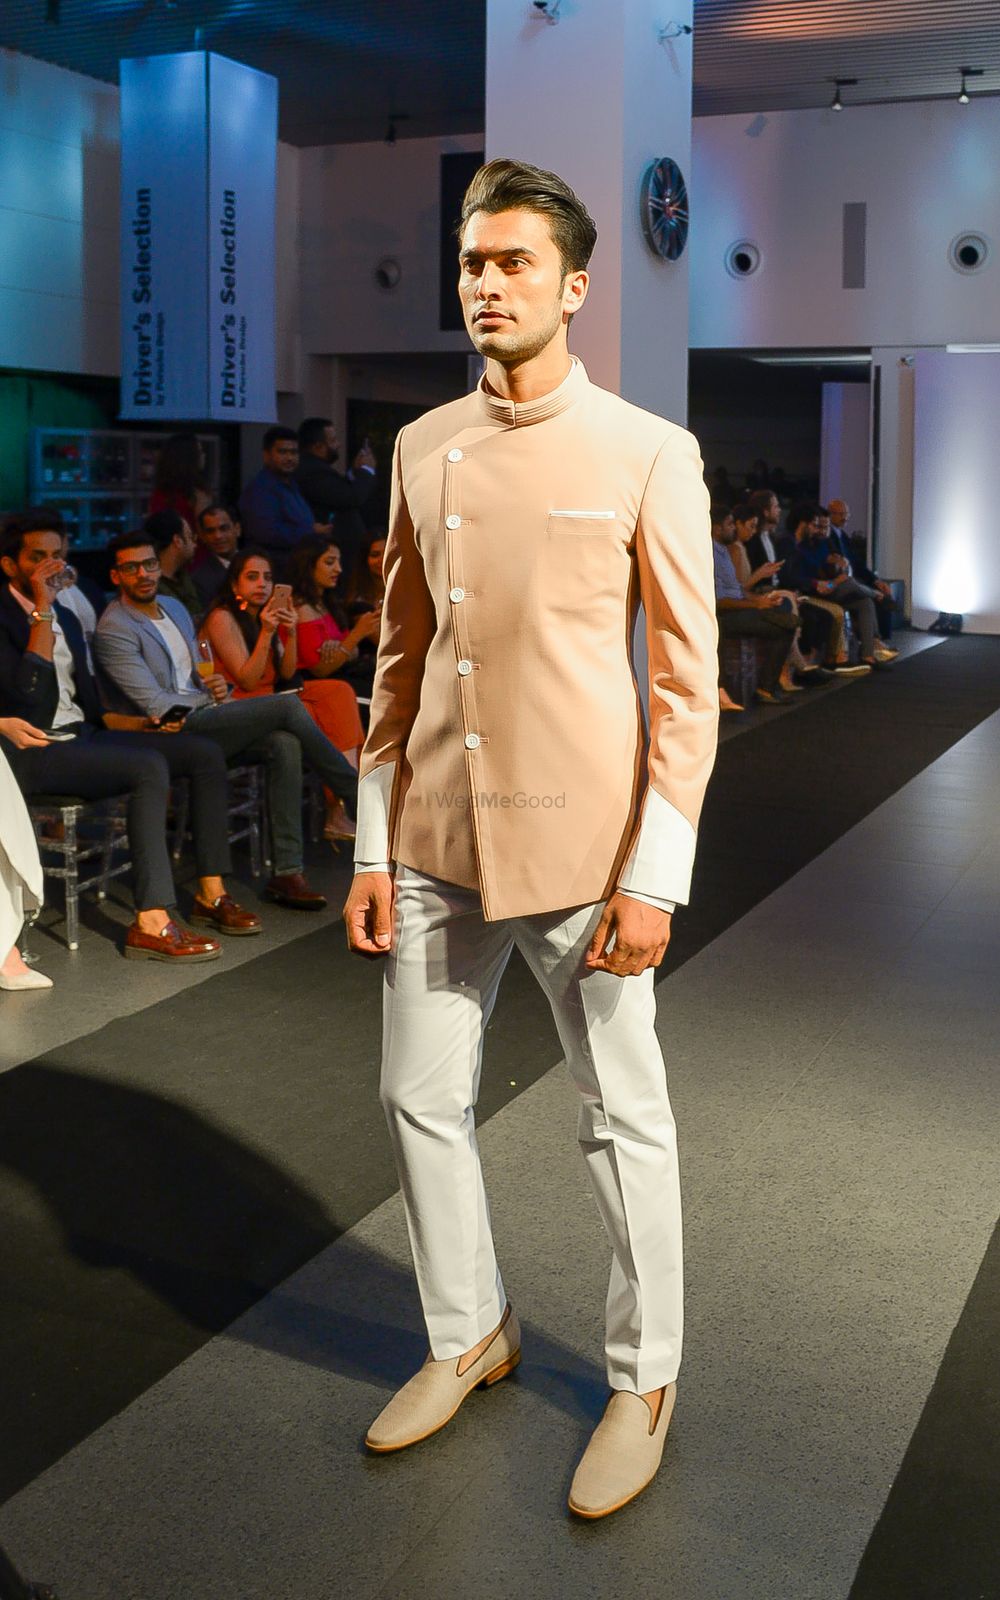 Photo From SS HOMME Bespoke '17-'18 : SStructure - By Sarah & Sandeep